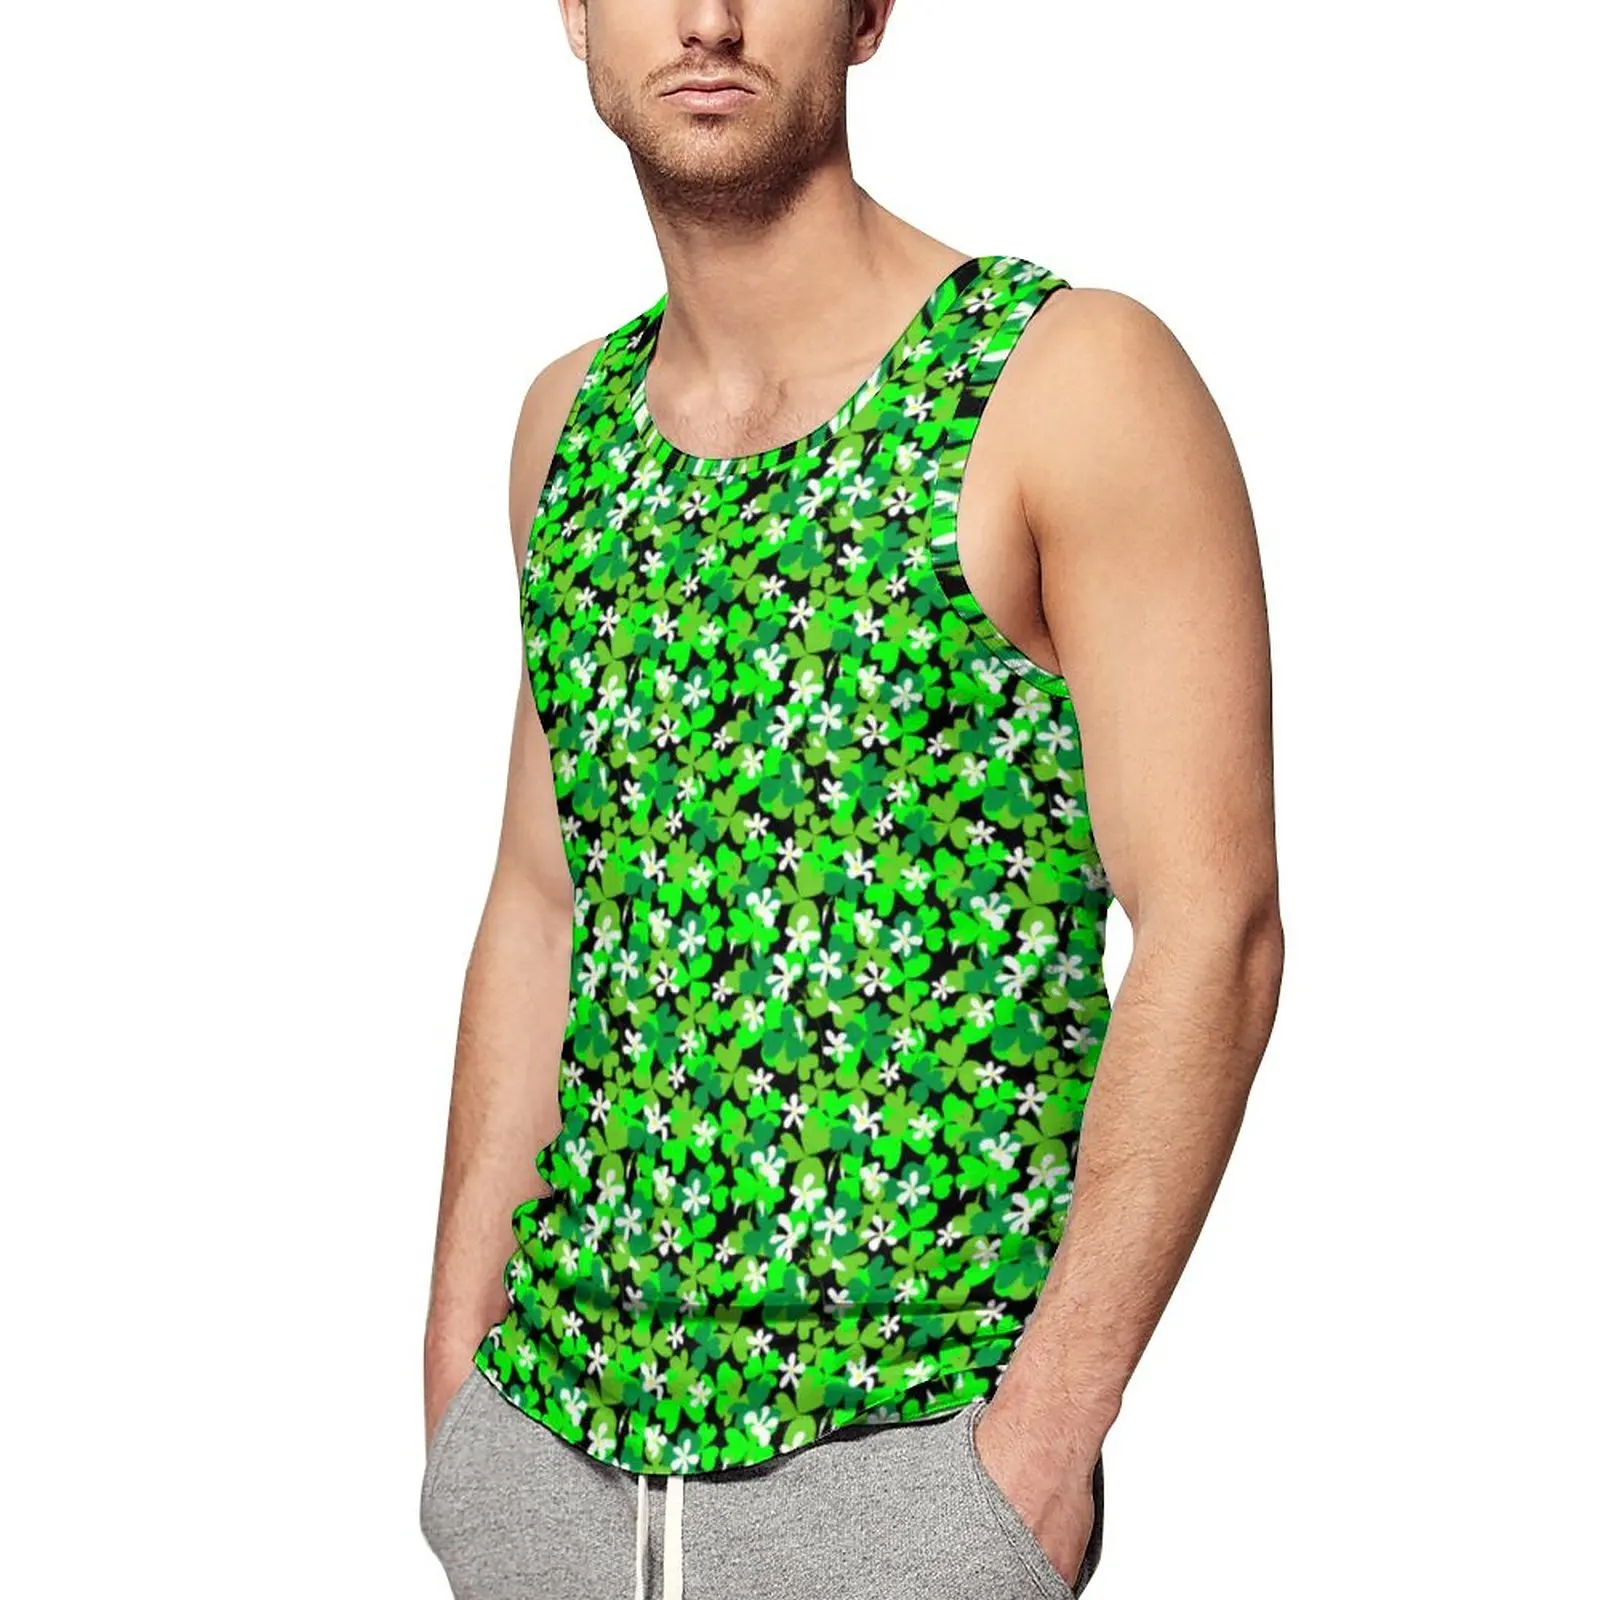 

Lucky Shamrock Summer Tank Top Green Leaves Print Training Tops Men Graphic Cool Sleeveless Vests Plus Size